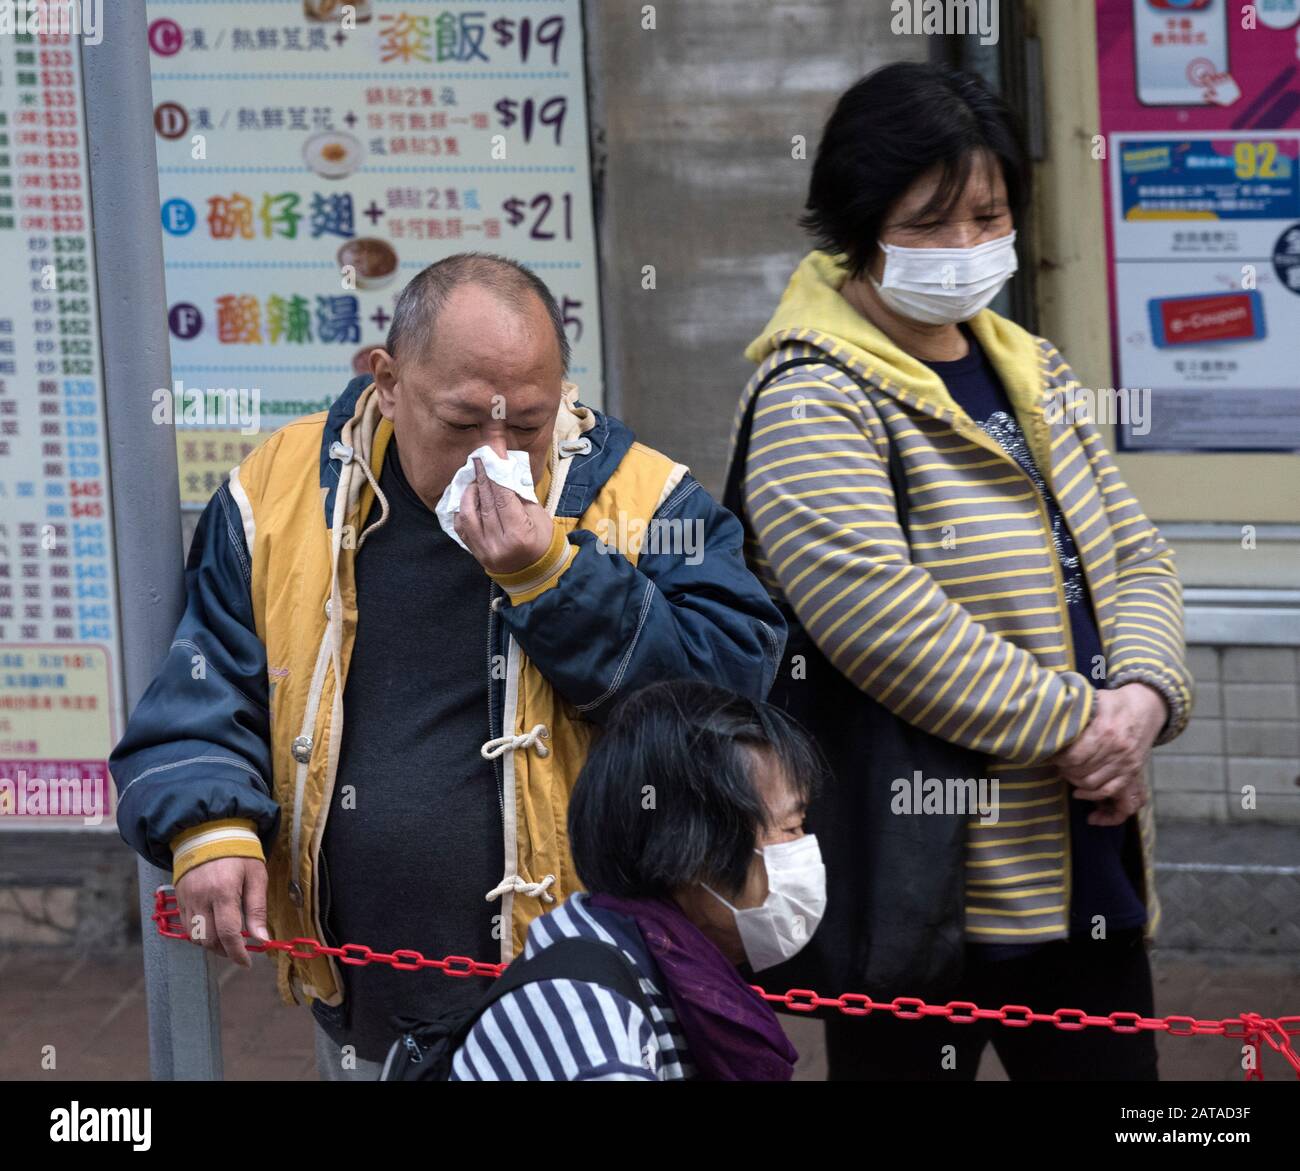 People wearing masks as protection against of the spreading virus from Wuhan, the Coronavirus, 2020, Hong Kong, China. Stock Photo